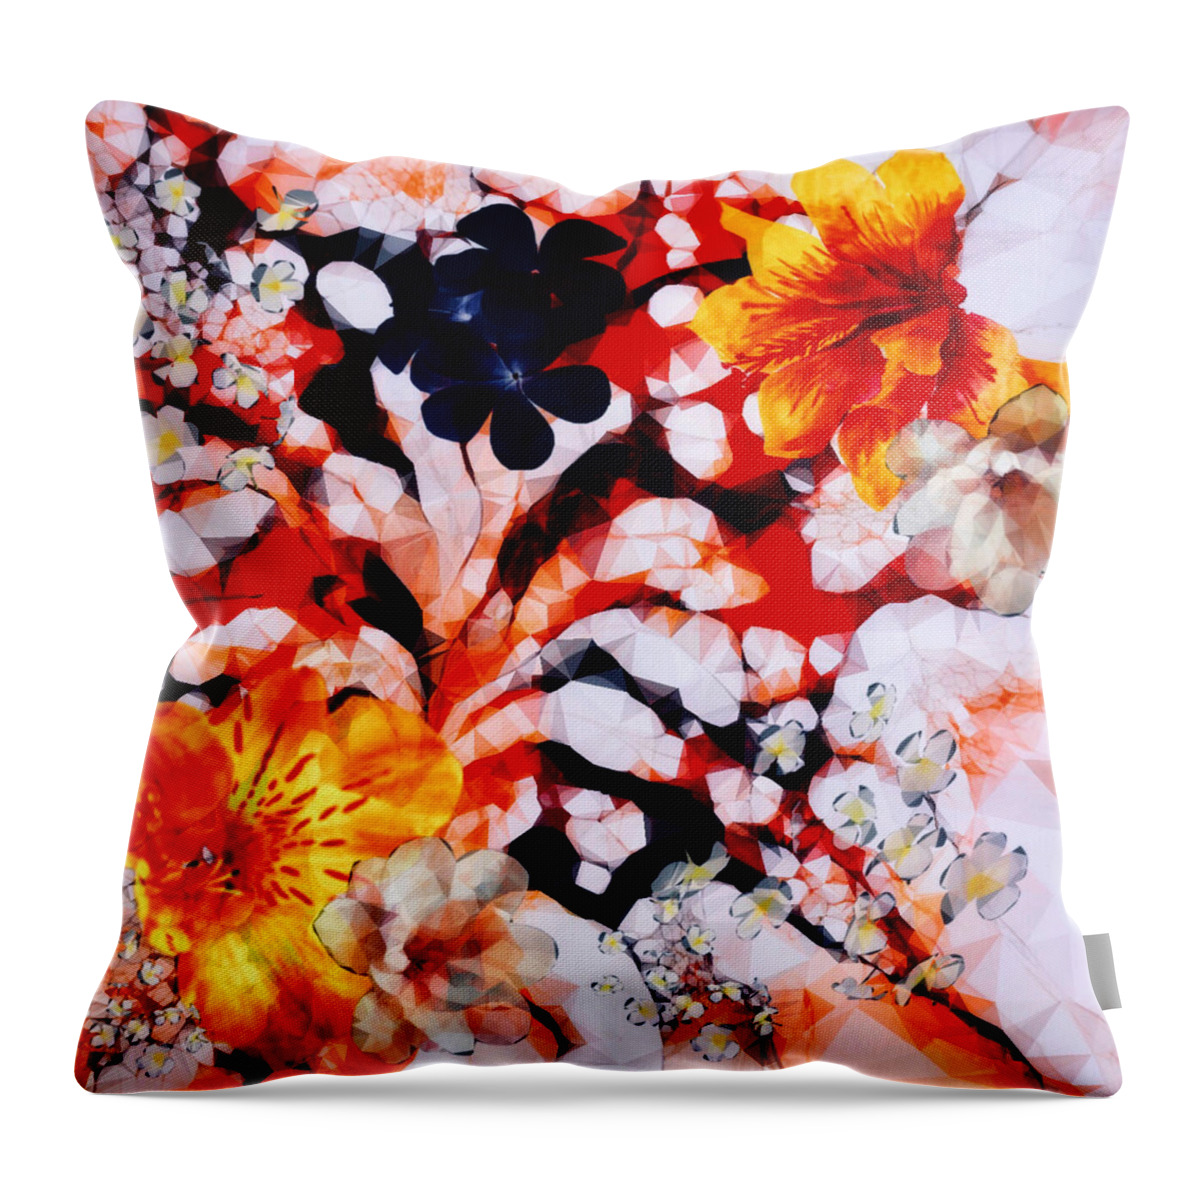 Abstract Art Throw Pillow featuring the mixed media Efflorescence by Canessa Thomas